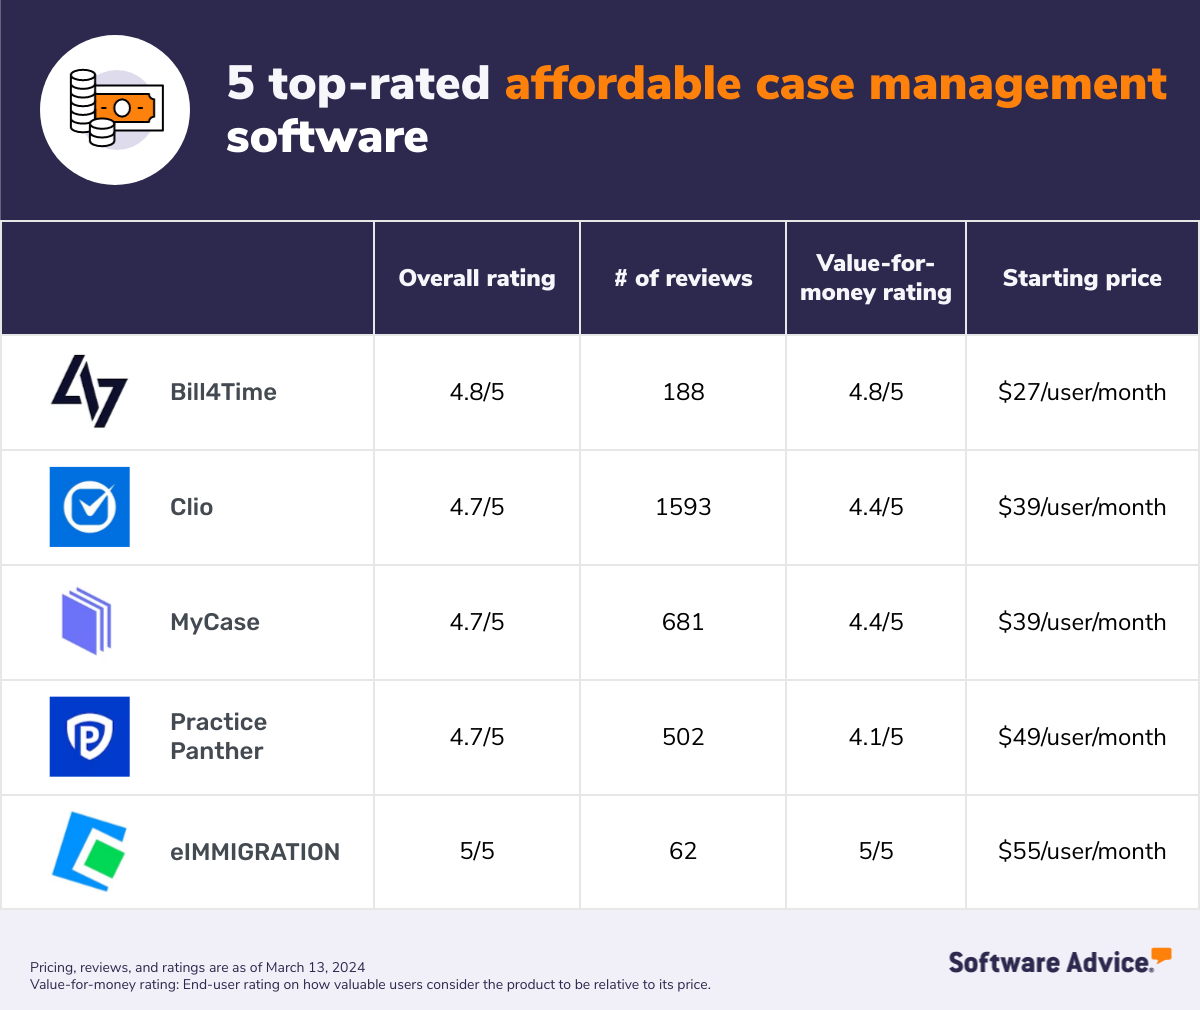 The graphic enlists the five top-rated affordable case management software with their overall ratings, number of reviews, value for money rating, and starting price.